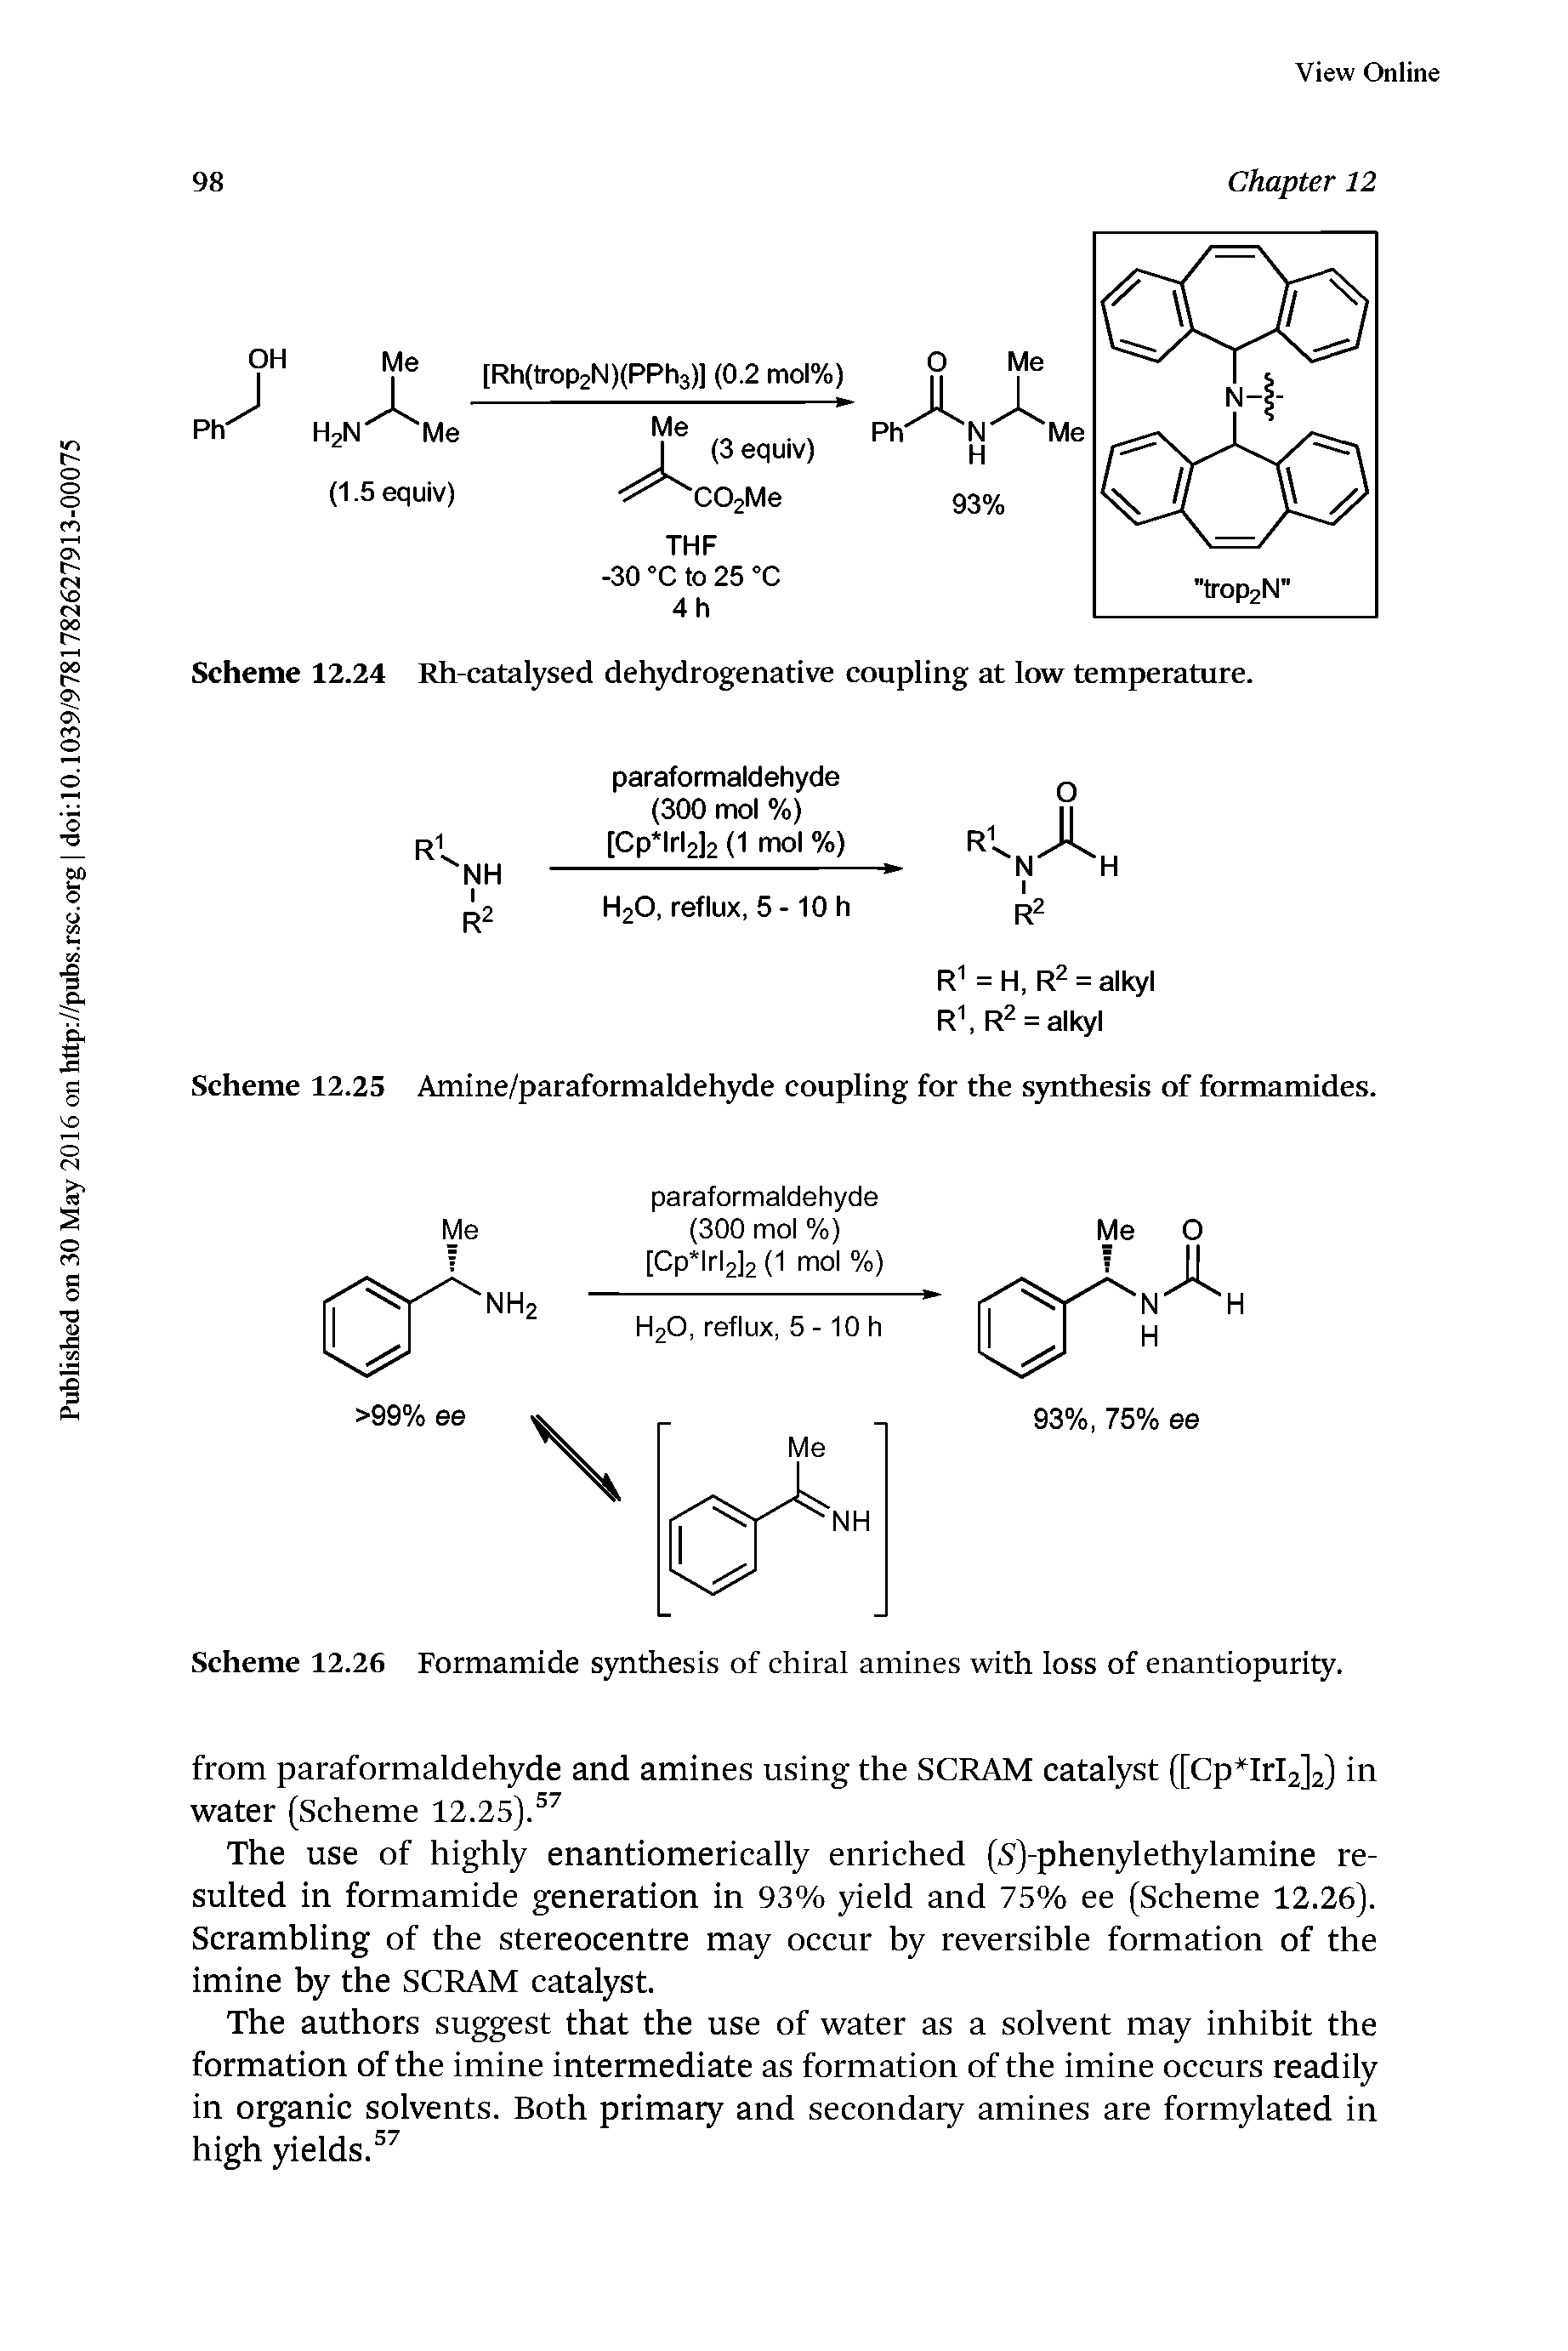 Scheme 12.25 Amine/paraformaldehyde eoupling for the synthesis of formamides.